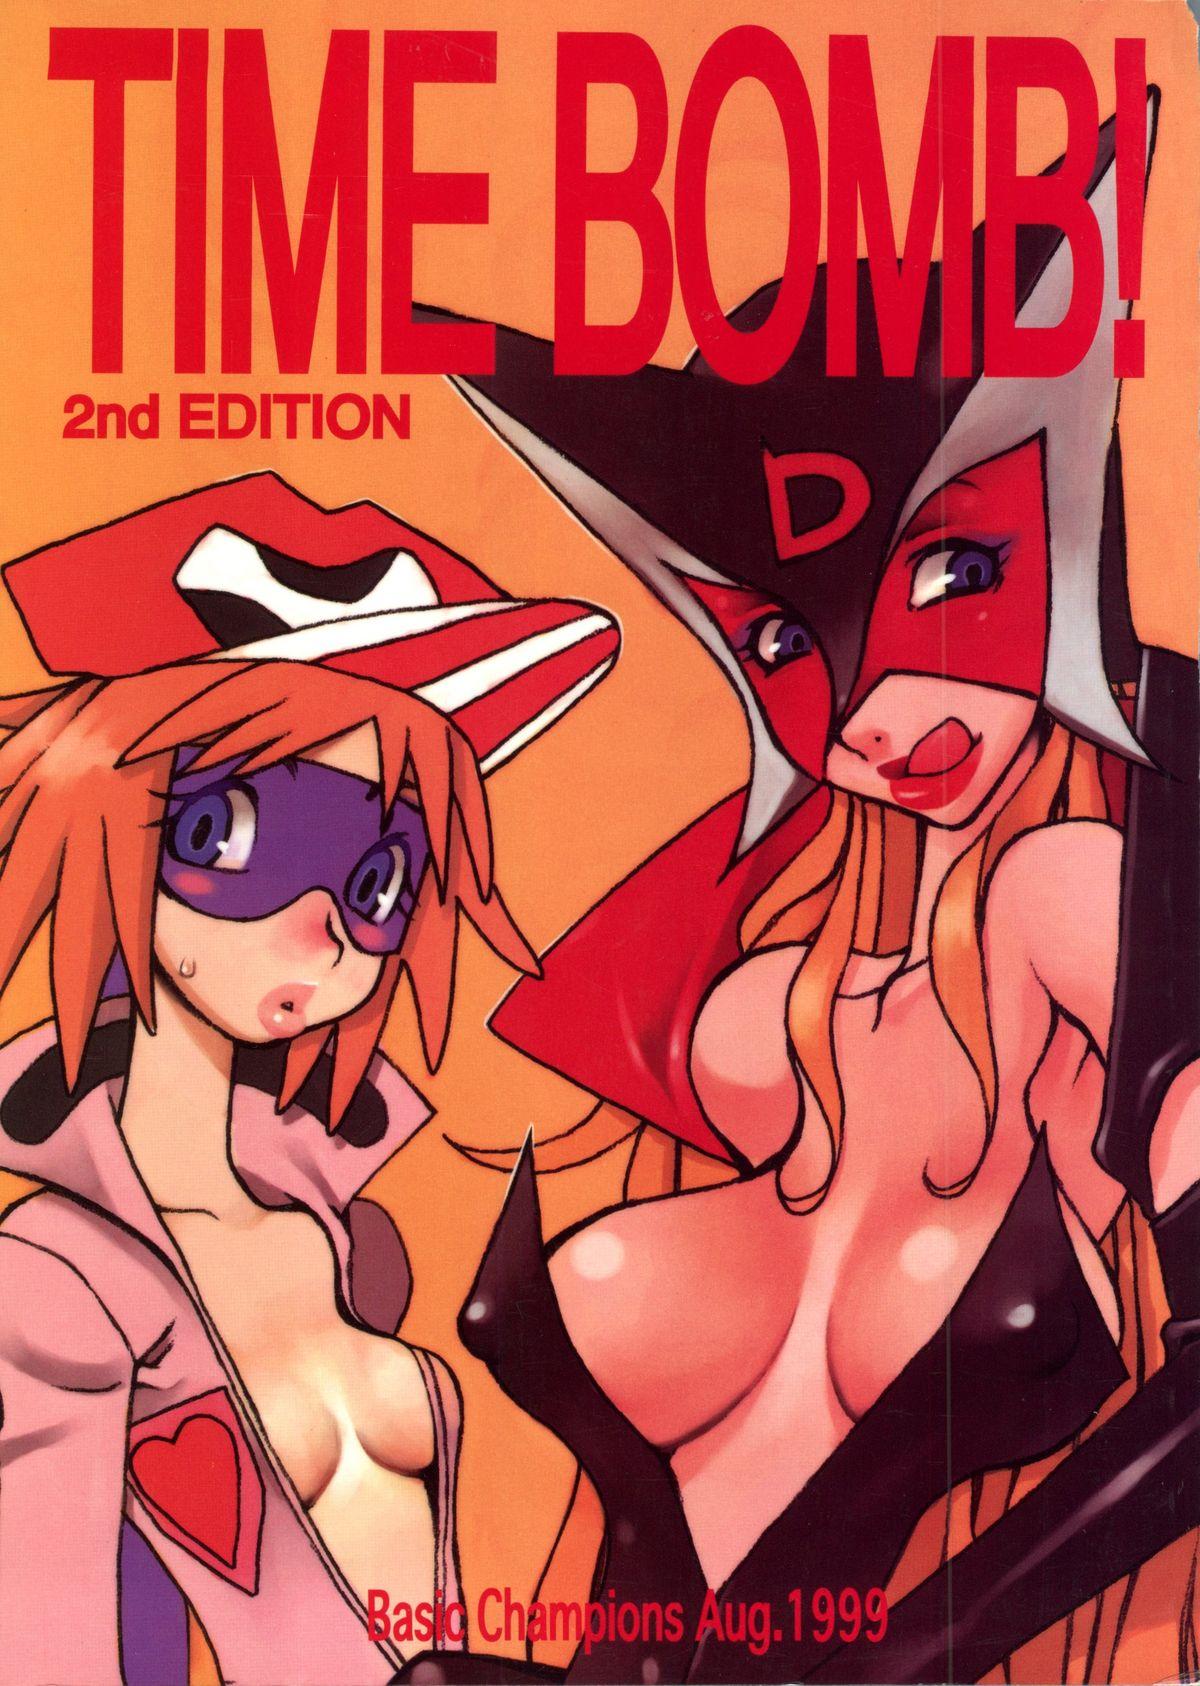 Dominant TIME BOMB! 2nd Edition - Yatterman Hot Girl - Page 1